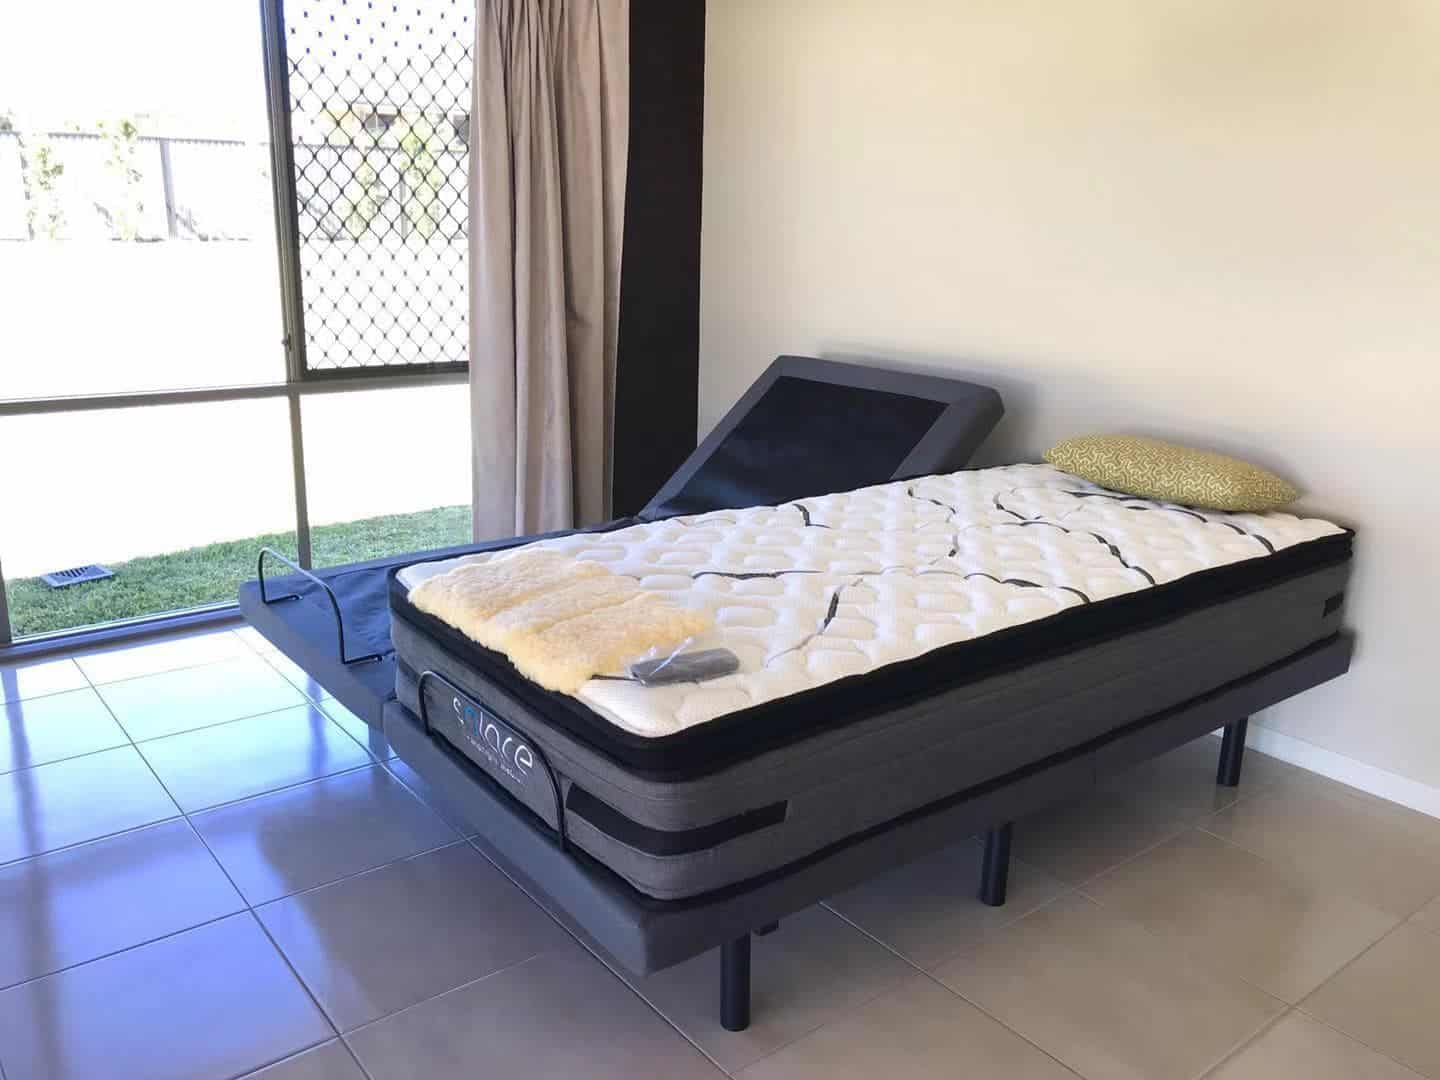 customer in home bed pic